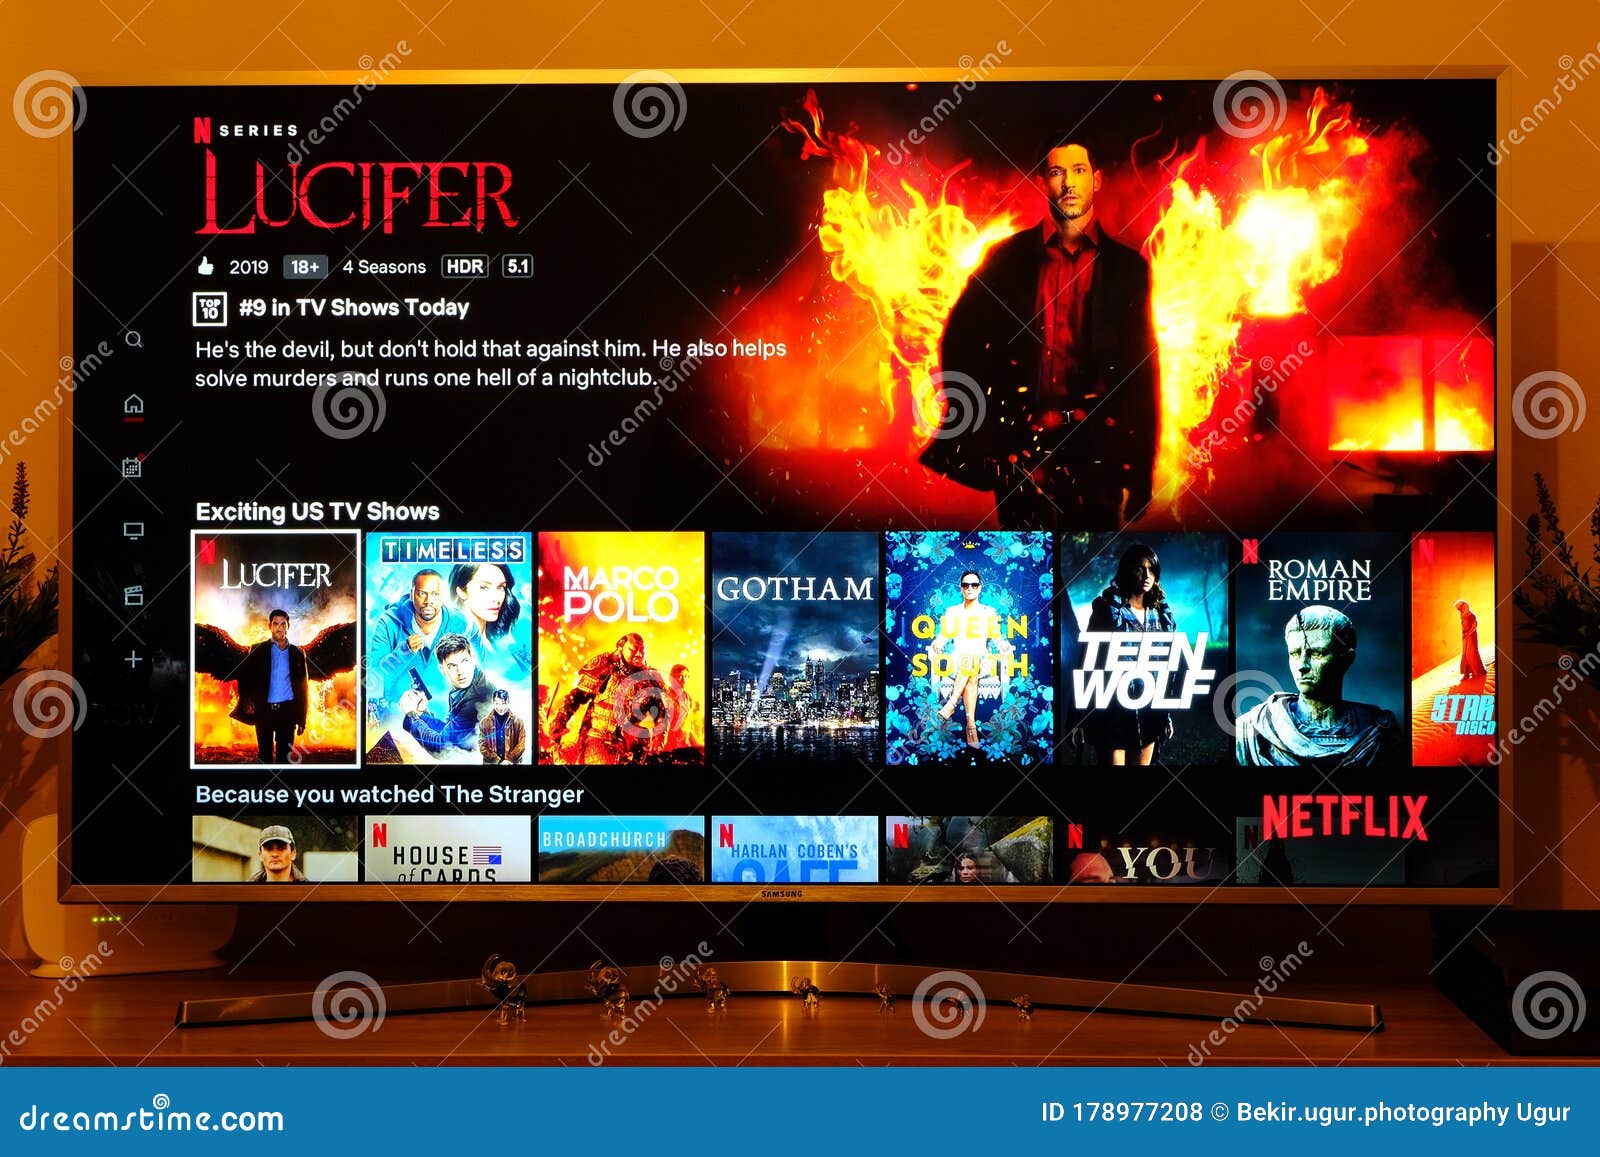 Gossip Girl - Netflix Television Screen with Popular Series Choice